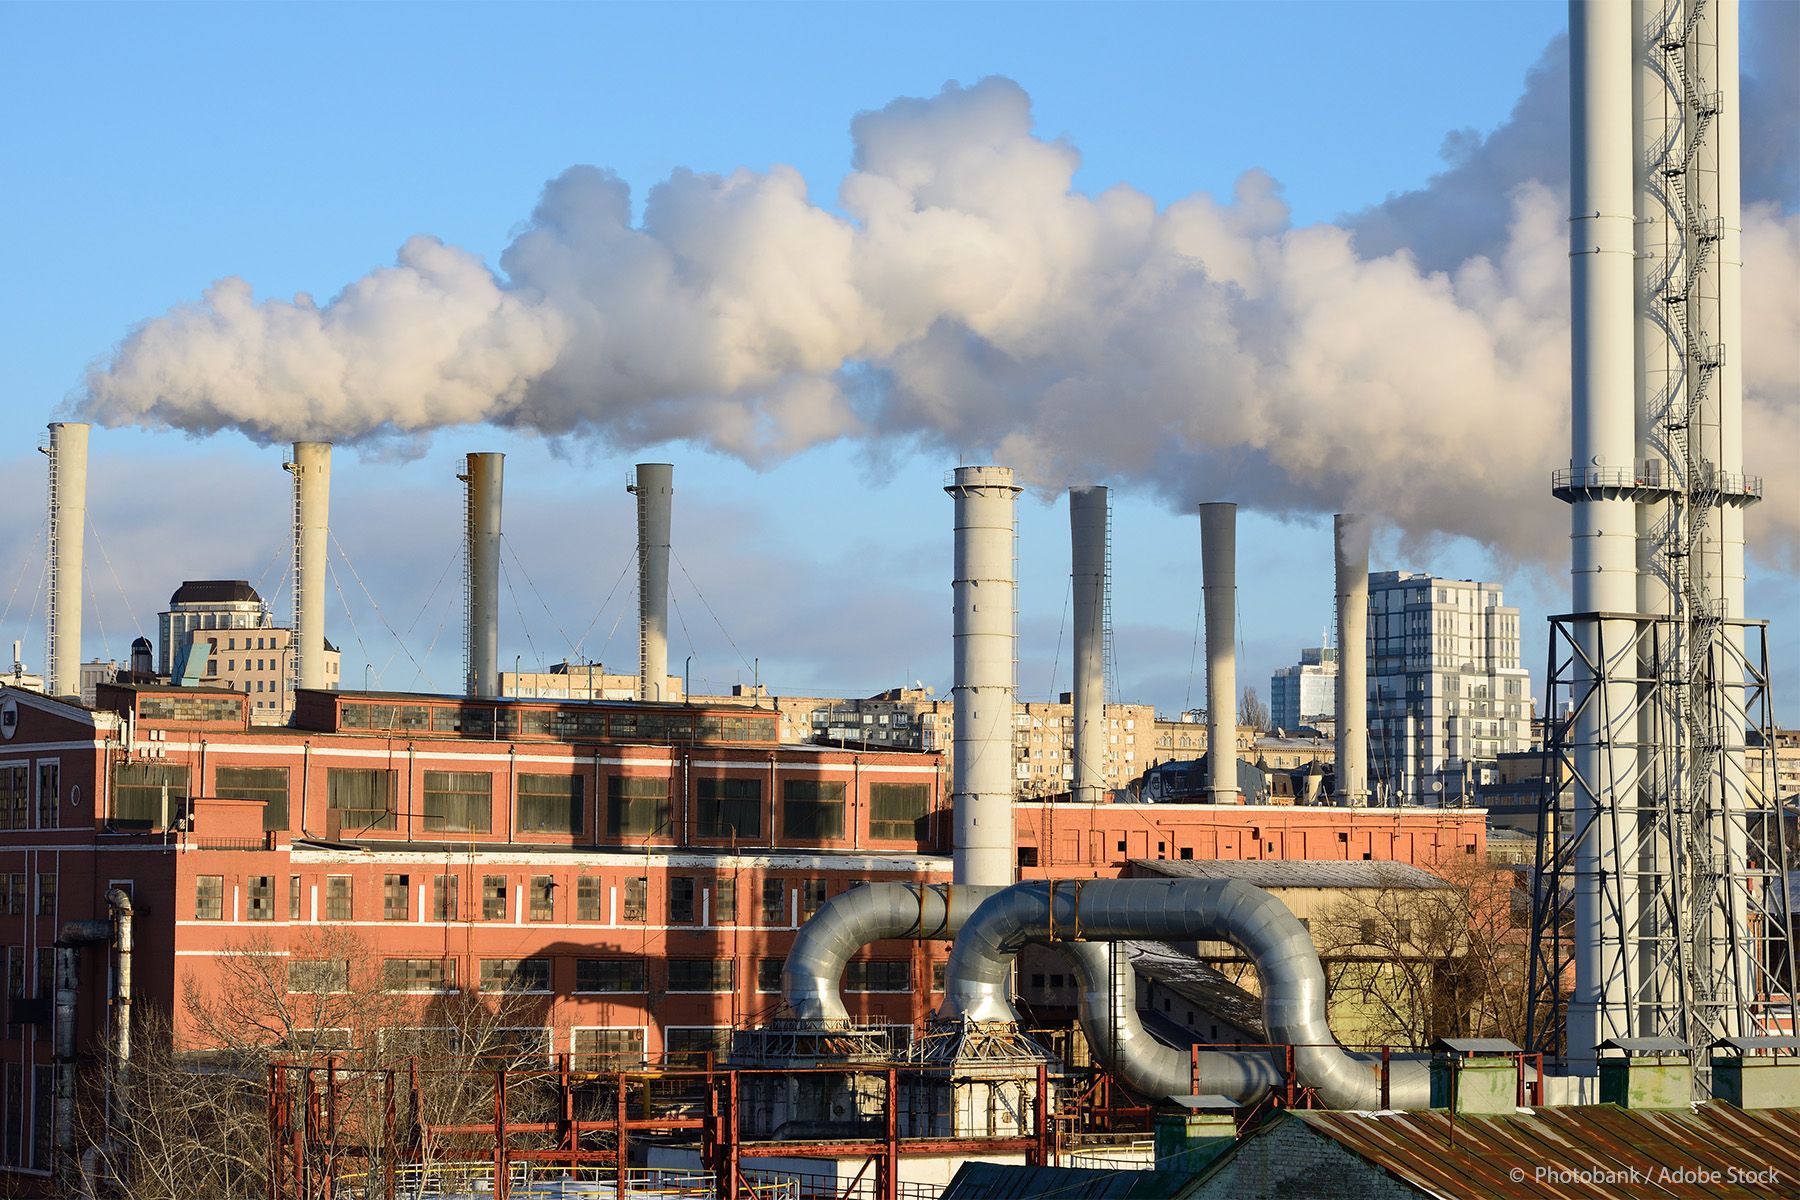 The EU Emissions Trading Scheme (ETS) and its reform in brief